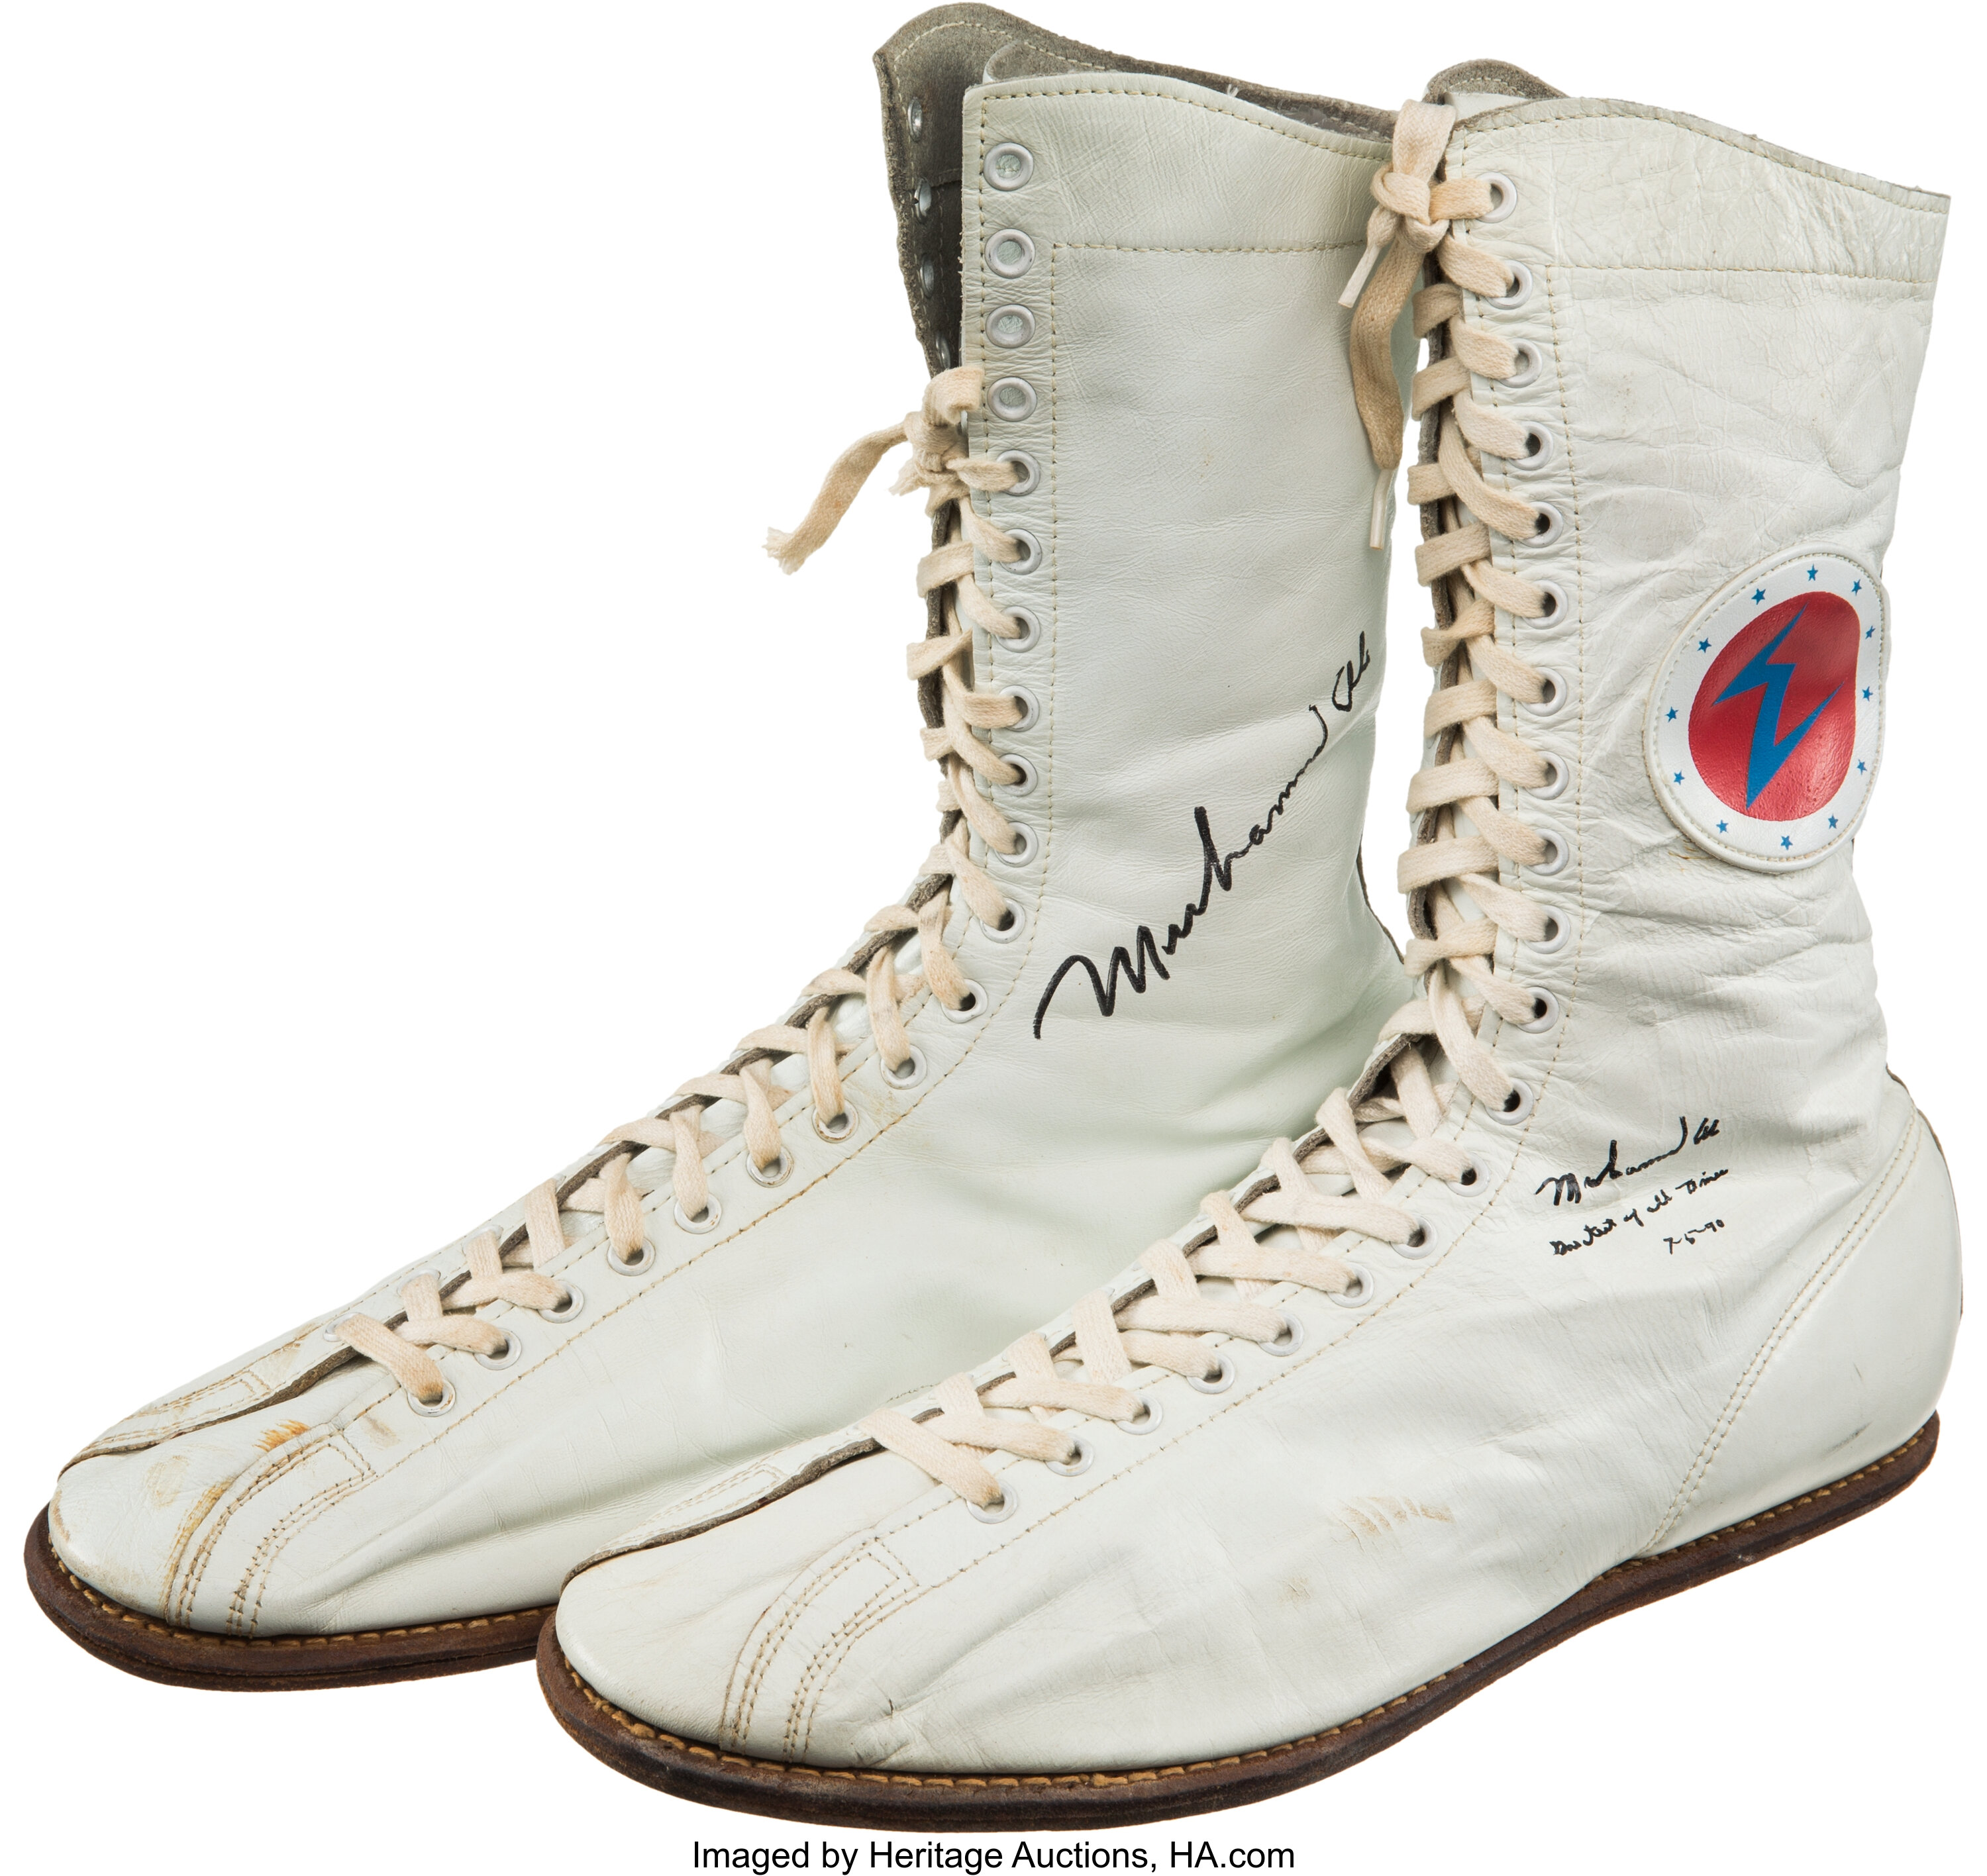 1973 Muhammad Ali Fight Worn & Signed Shoes from Ken Norton I | Lot #50018  | Heritage Auctions